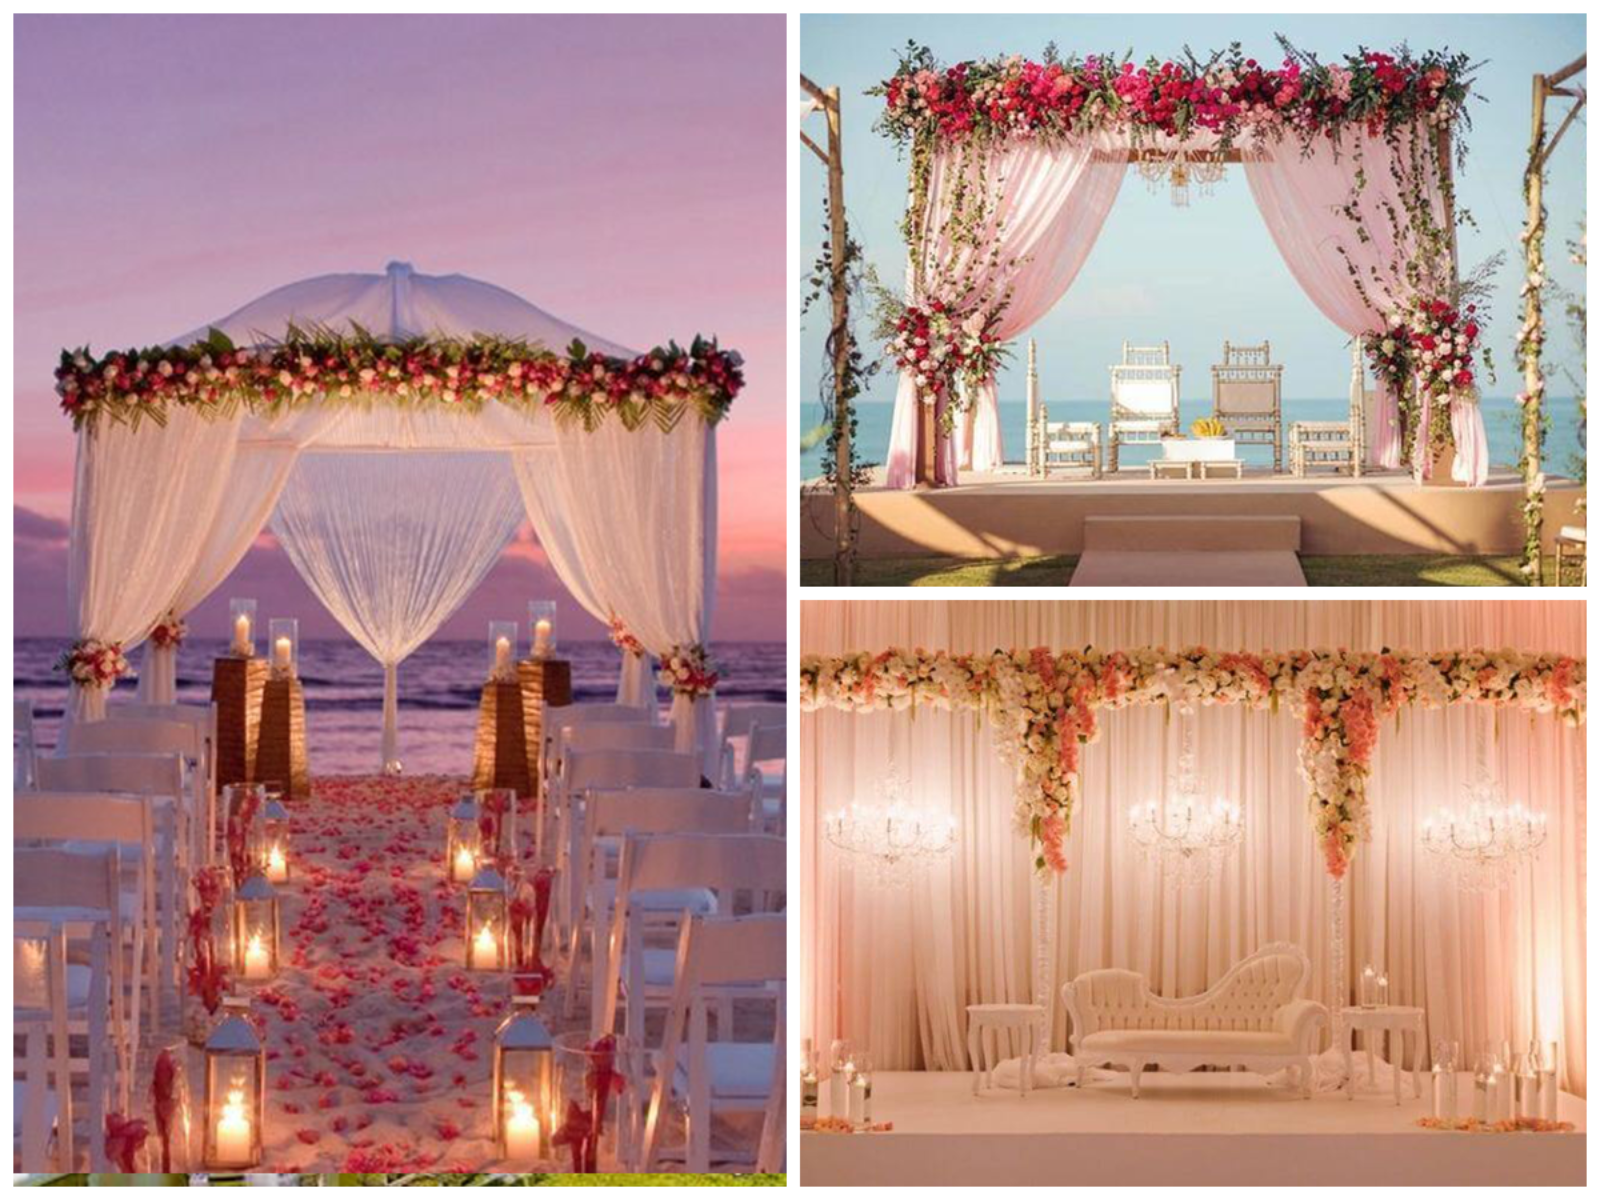 5 Wedding Stage Design Ideas That You Will Love